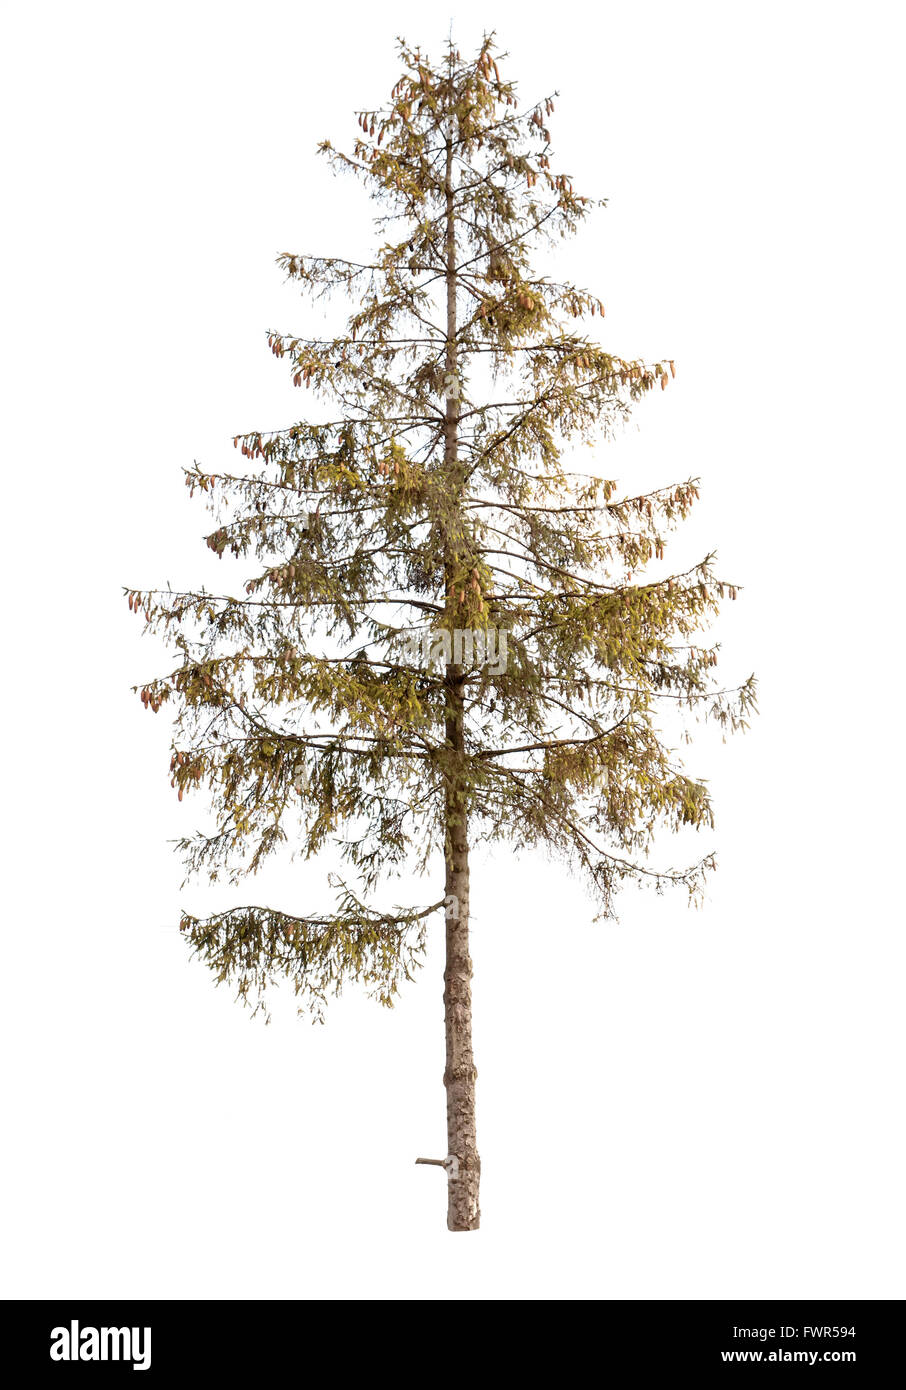 pine tree is isolated on a white background Stock Photo